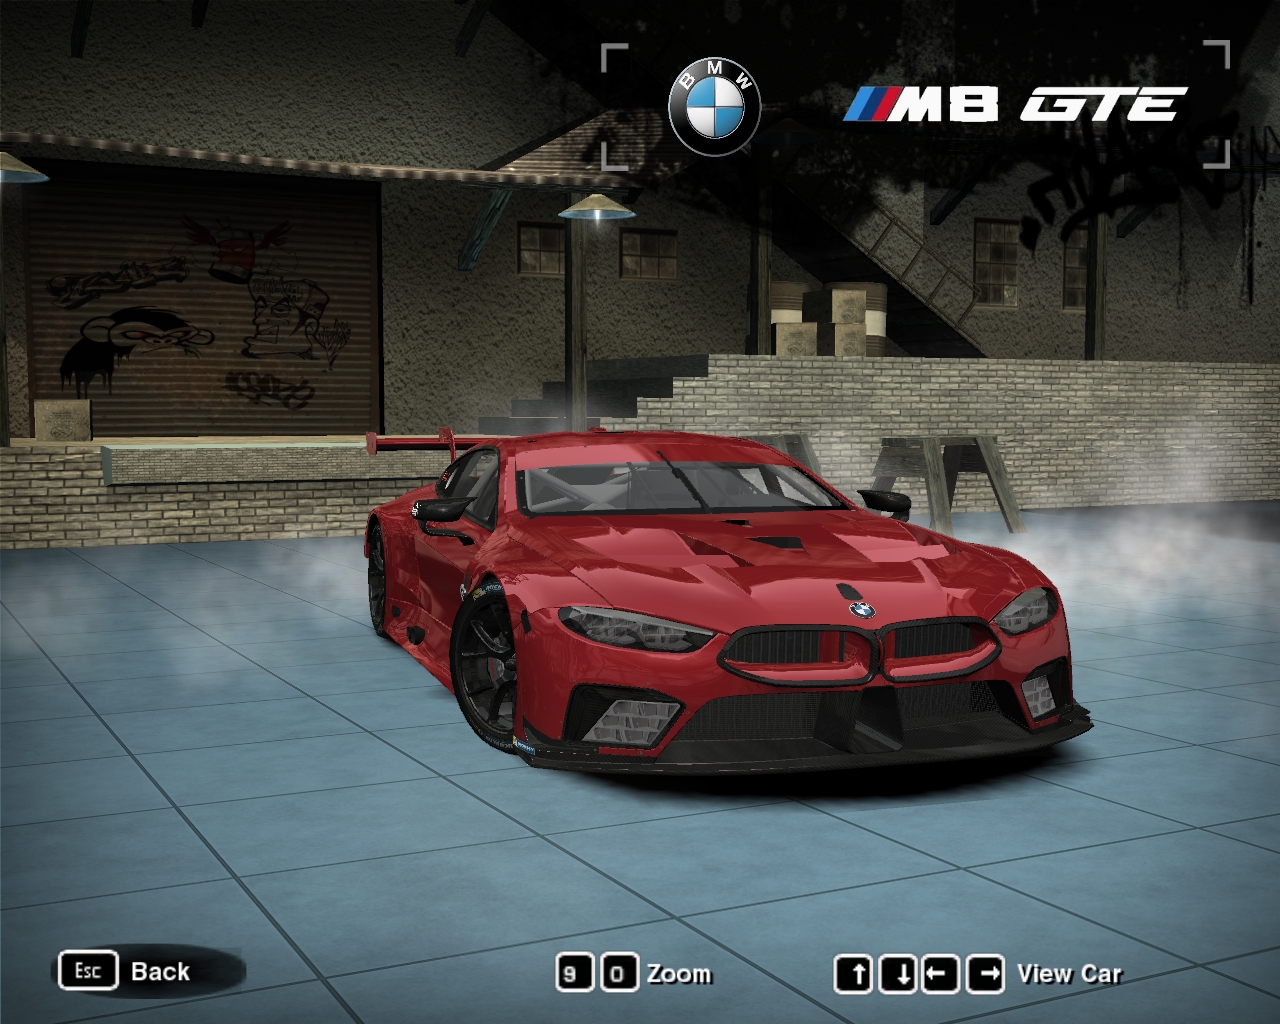 Need For Speed Most Wanted BMW M8 GTE